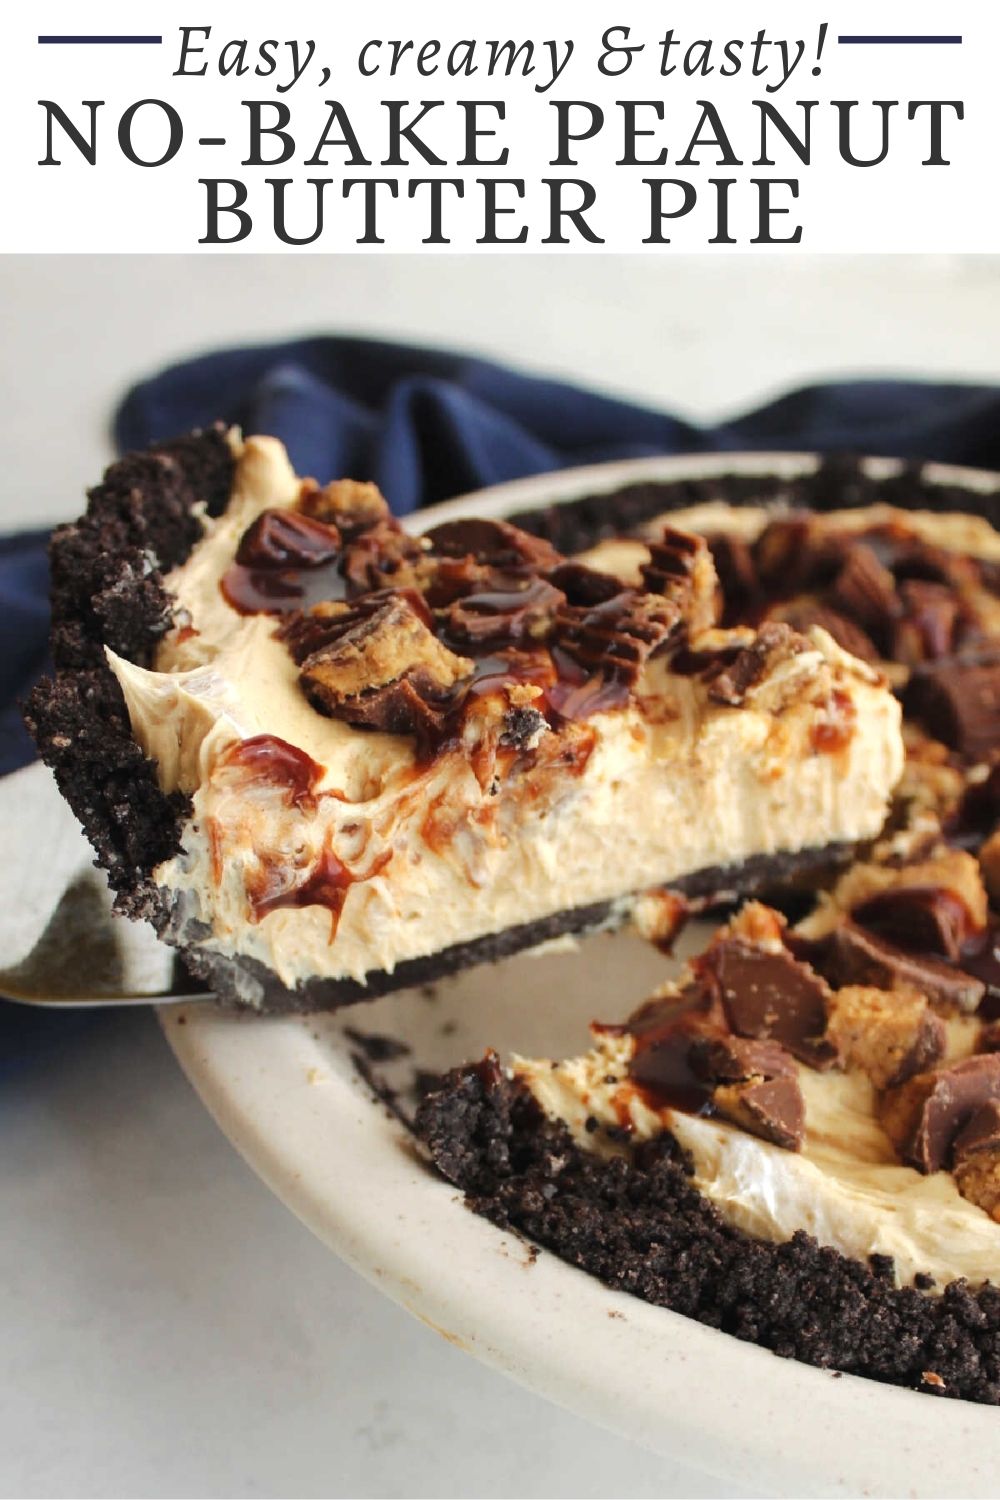 Creamy no-bake peanut butter pie is easy to make and tastes so good. Put it in an Oreo crust and top with with Reese's peanut butter cups for an extra special chocolate and peanut butter treat.